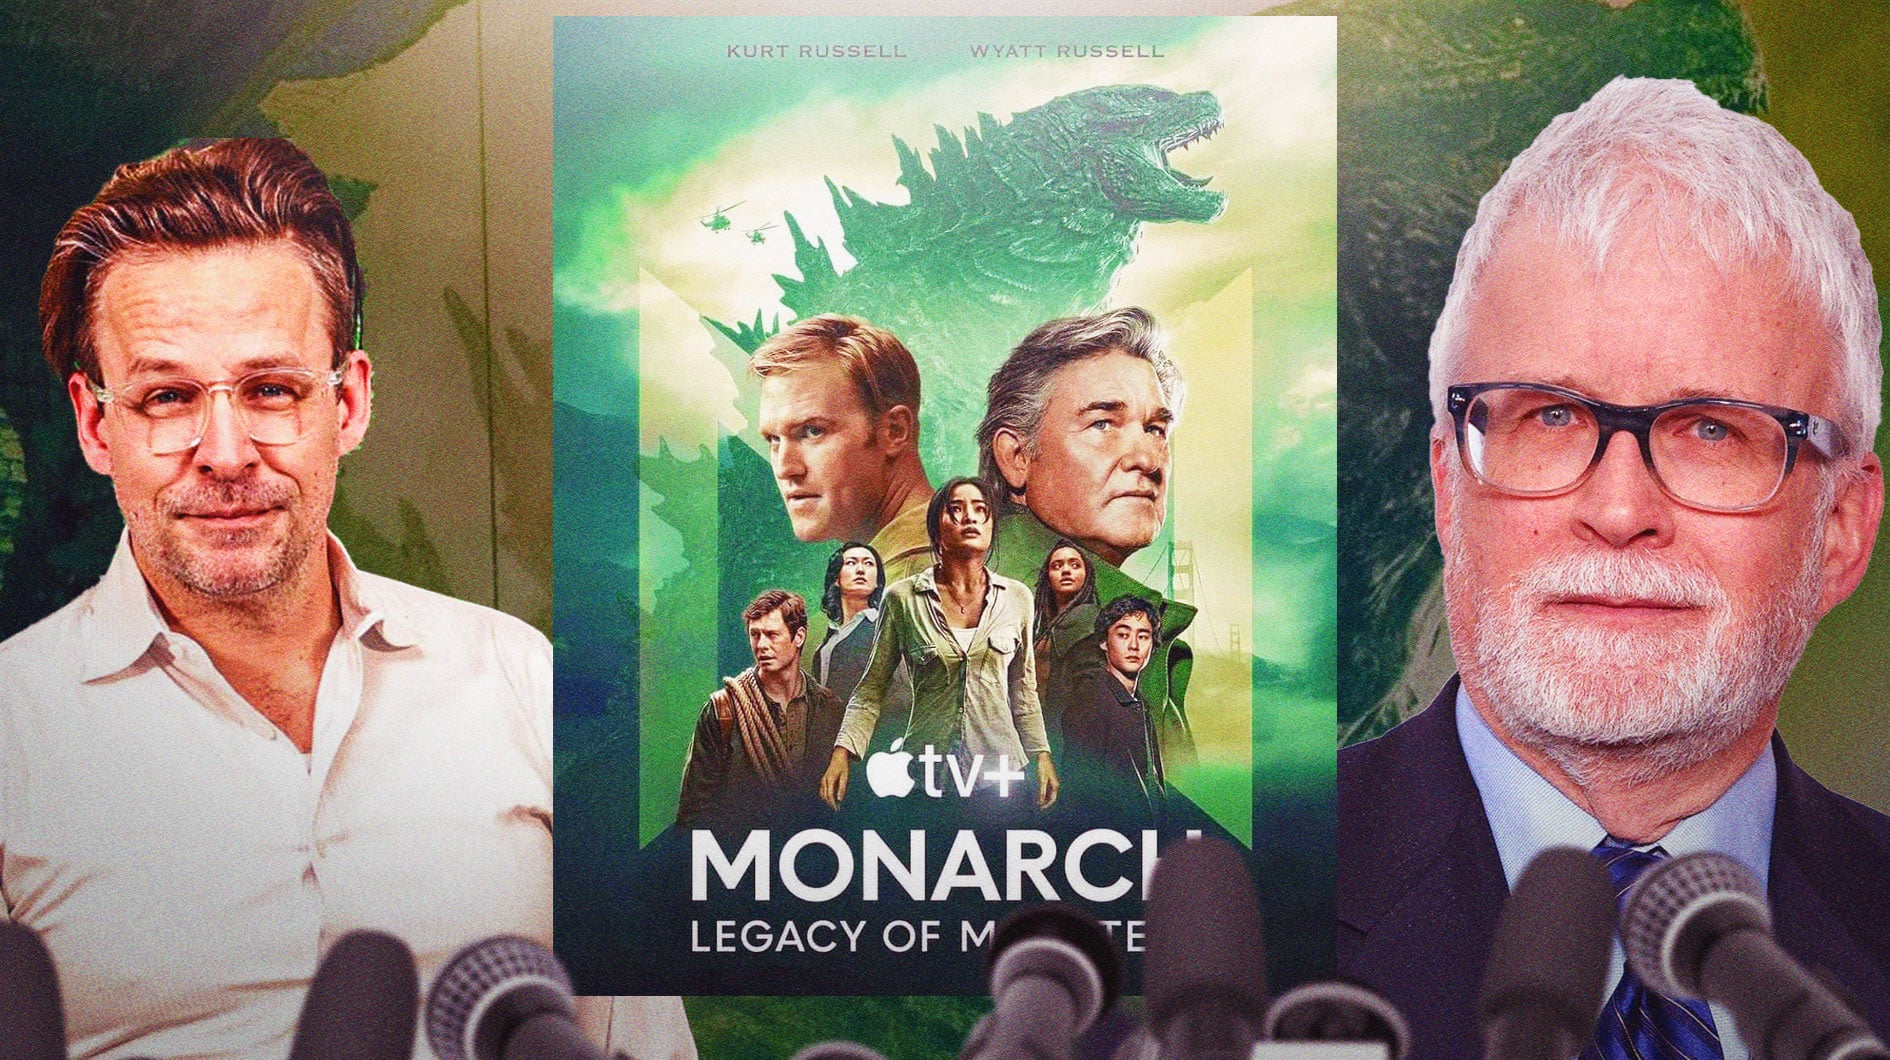 Monarch: Legacy of Monsters' exclusive first look at the Titans